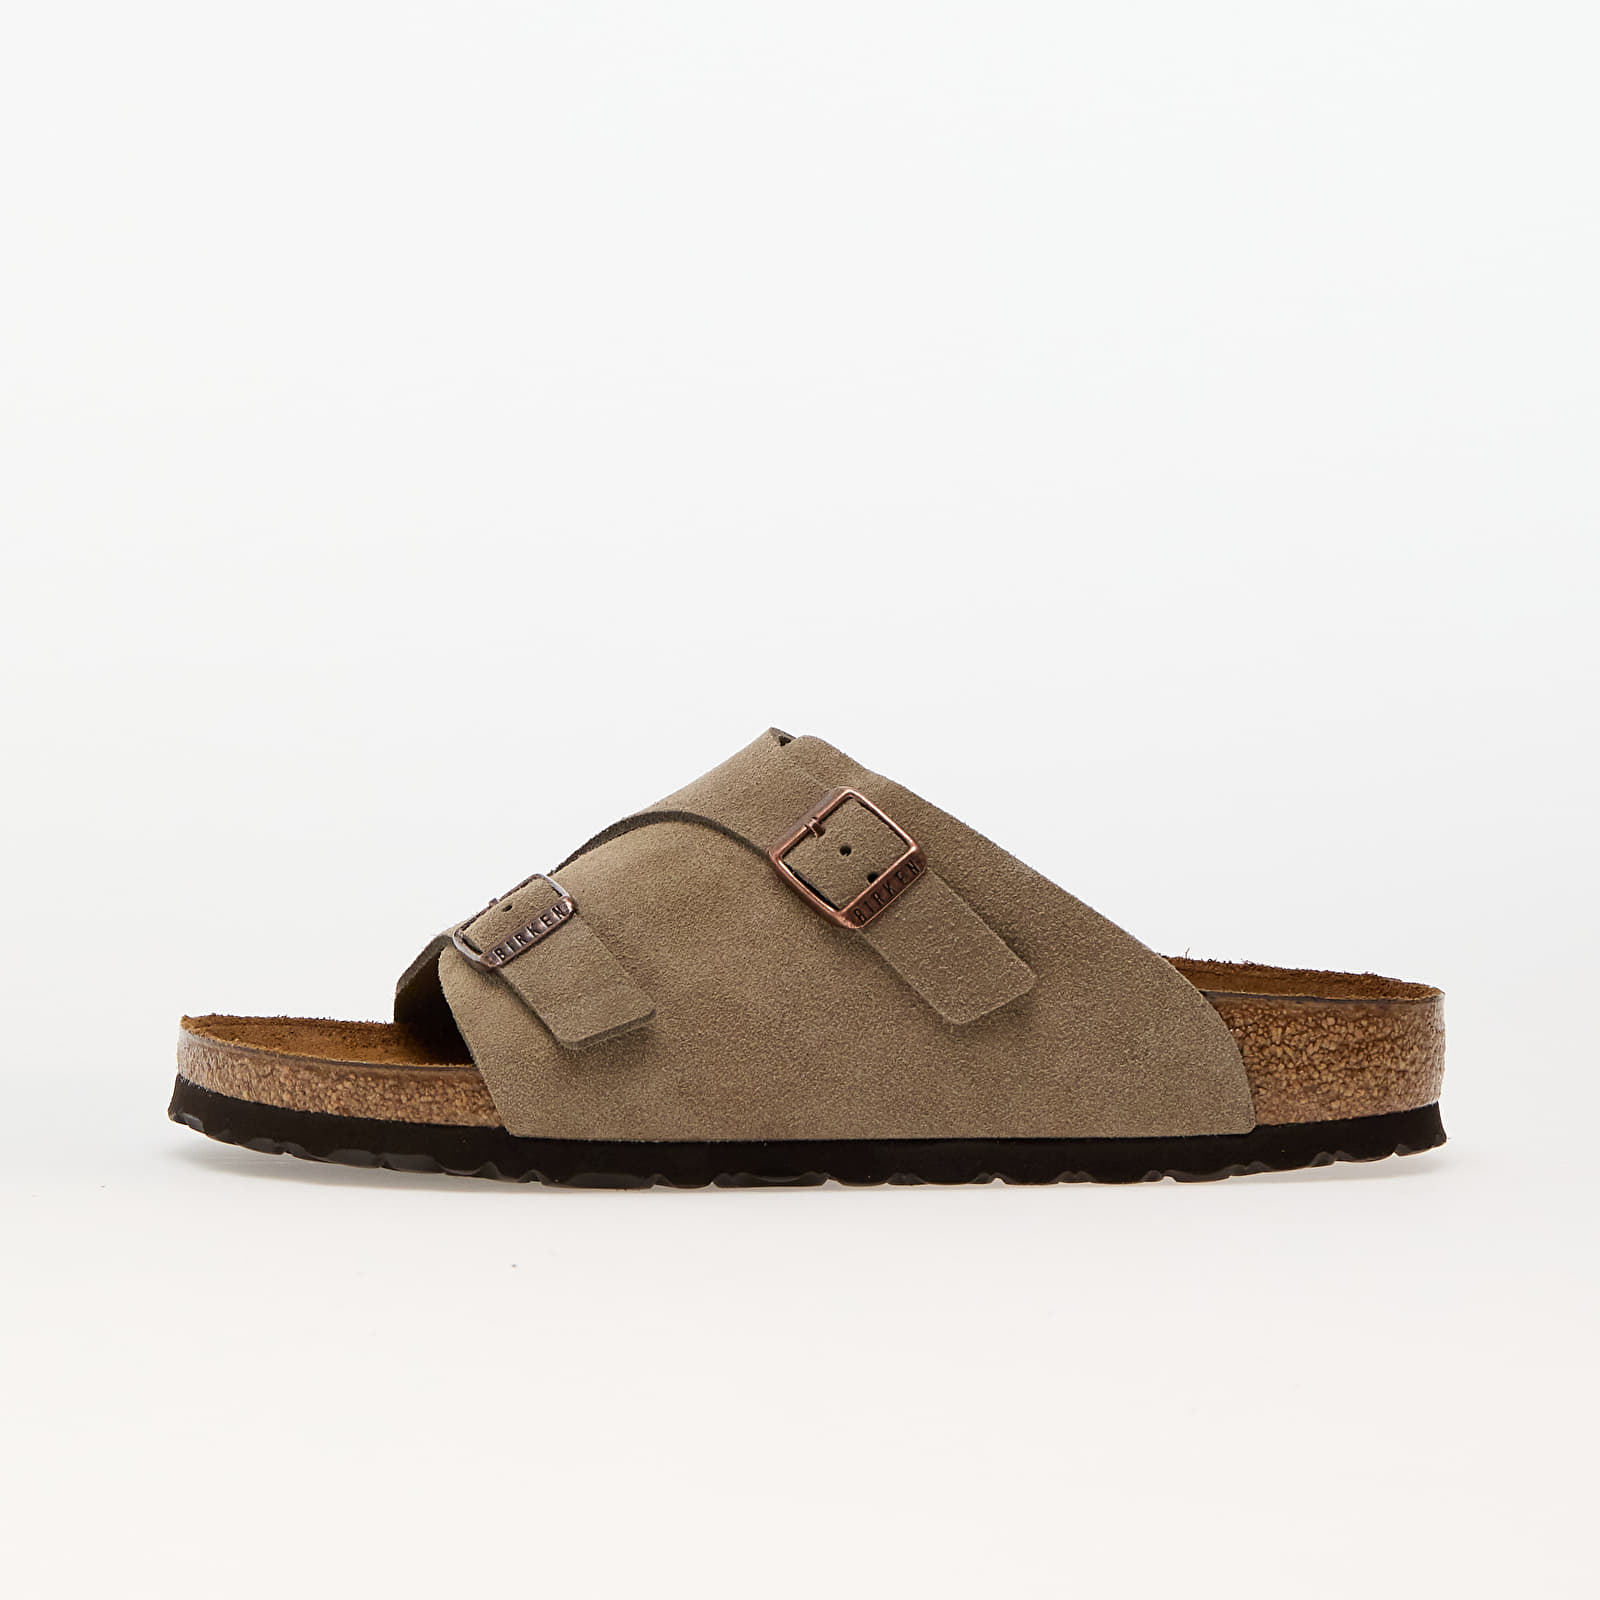 Women's shoes Birkenstock Zürich Suede Leather Taupe